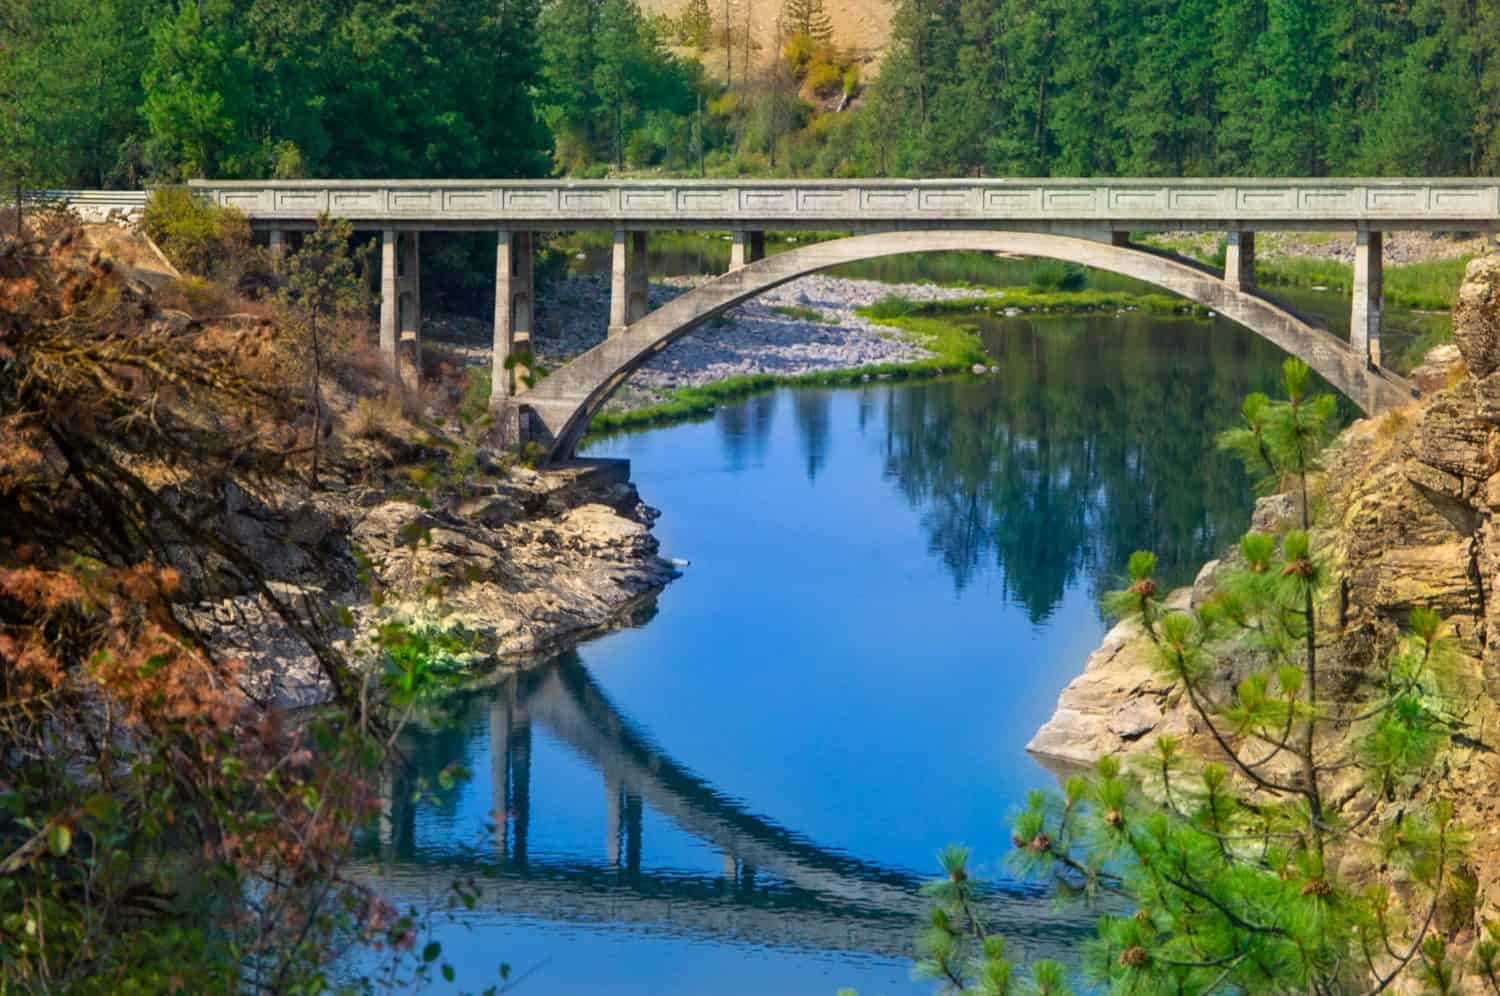 Post Falls, ID—Aug 6, 2018; arched concrete bridge spans Spokane river with blue sky and architecture reflecting off of the water in time exposure with evergreen trees in background.